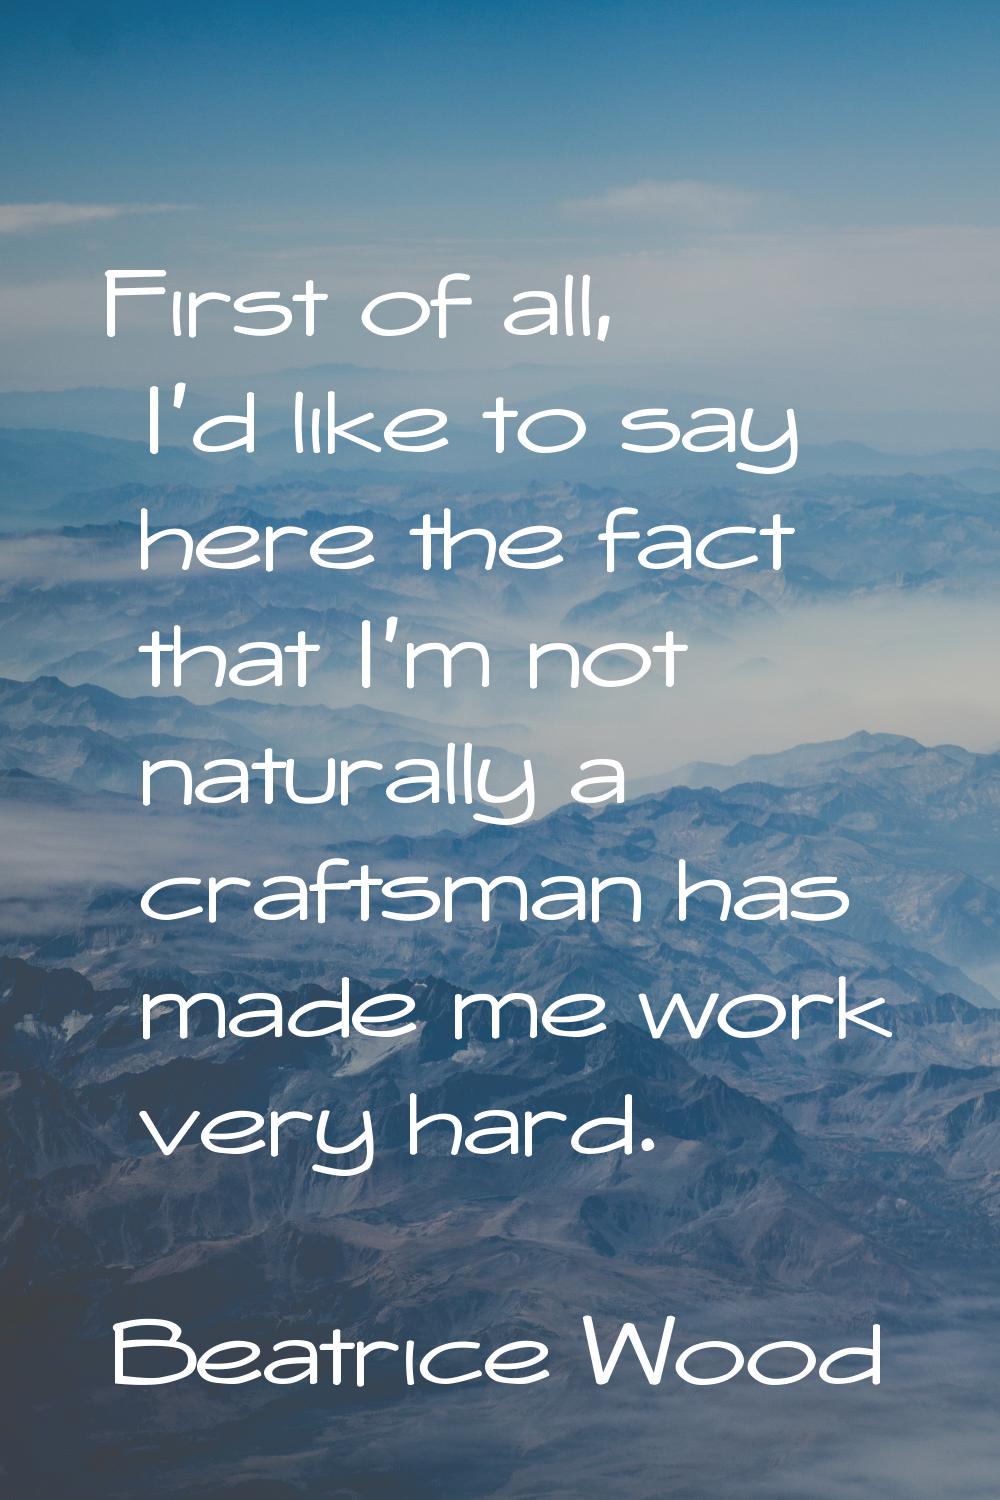 First of all, I'd like to say here the fact that I'm not naturally a craftsman has made me work ver